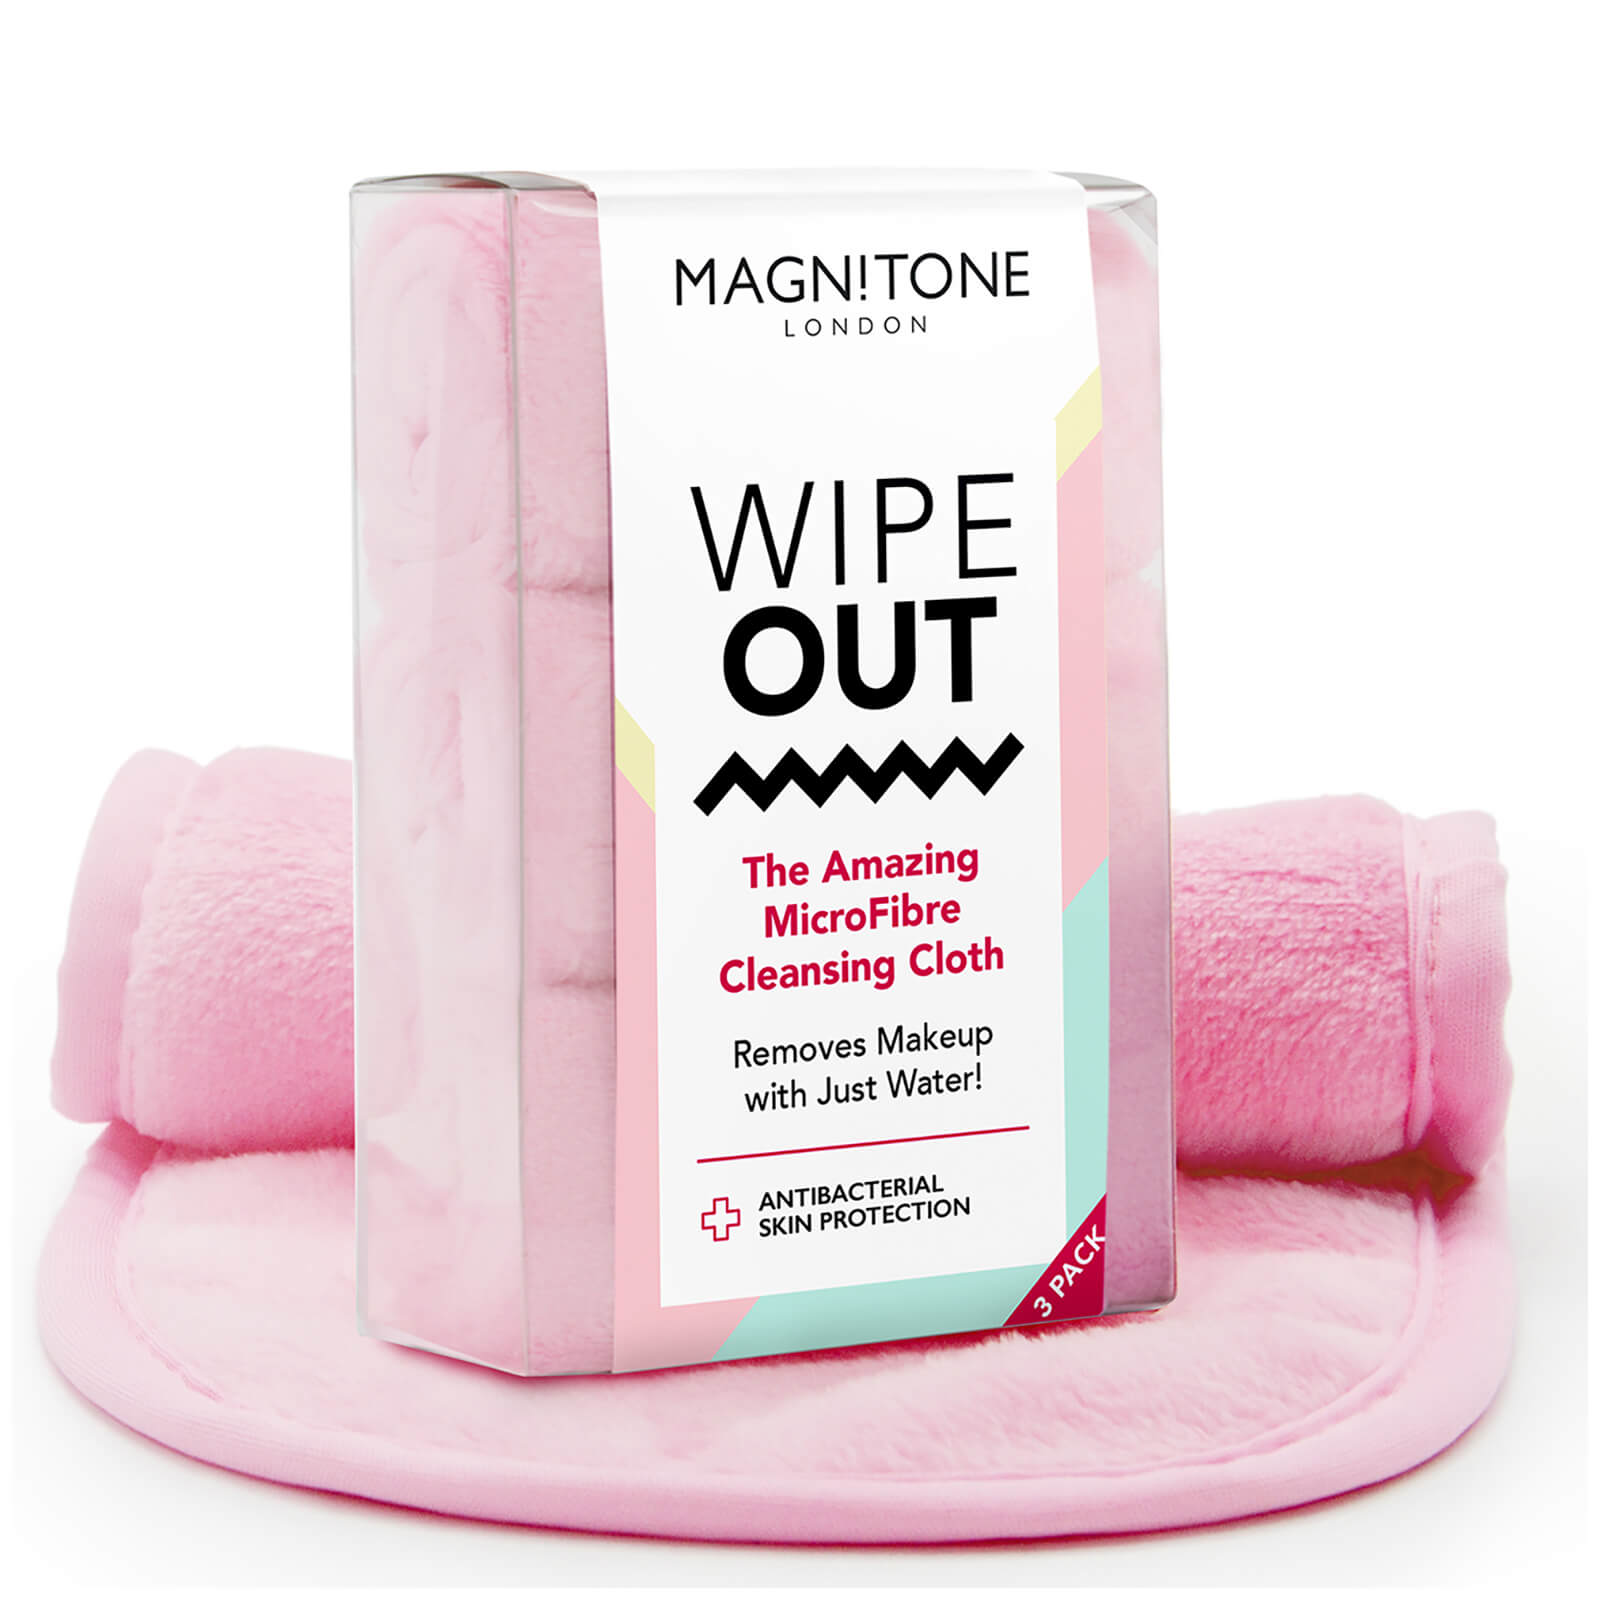 Magnitone London WipeOut! MicroFibre Cleansing Cloth with Antibacterial Protection - Pink (Pack of 3)